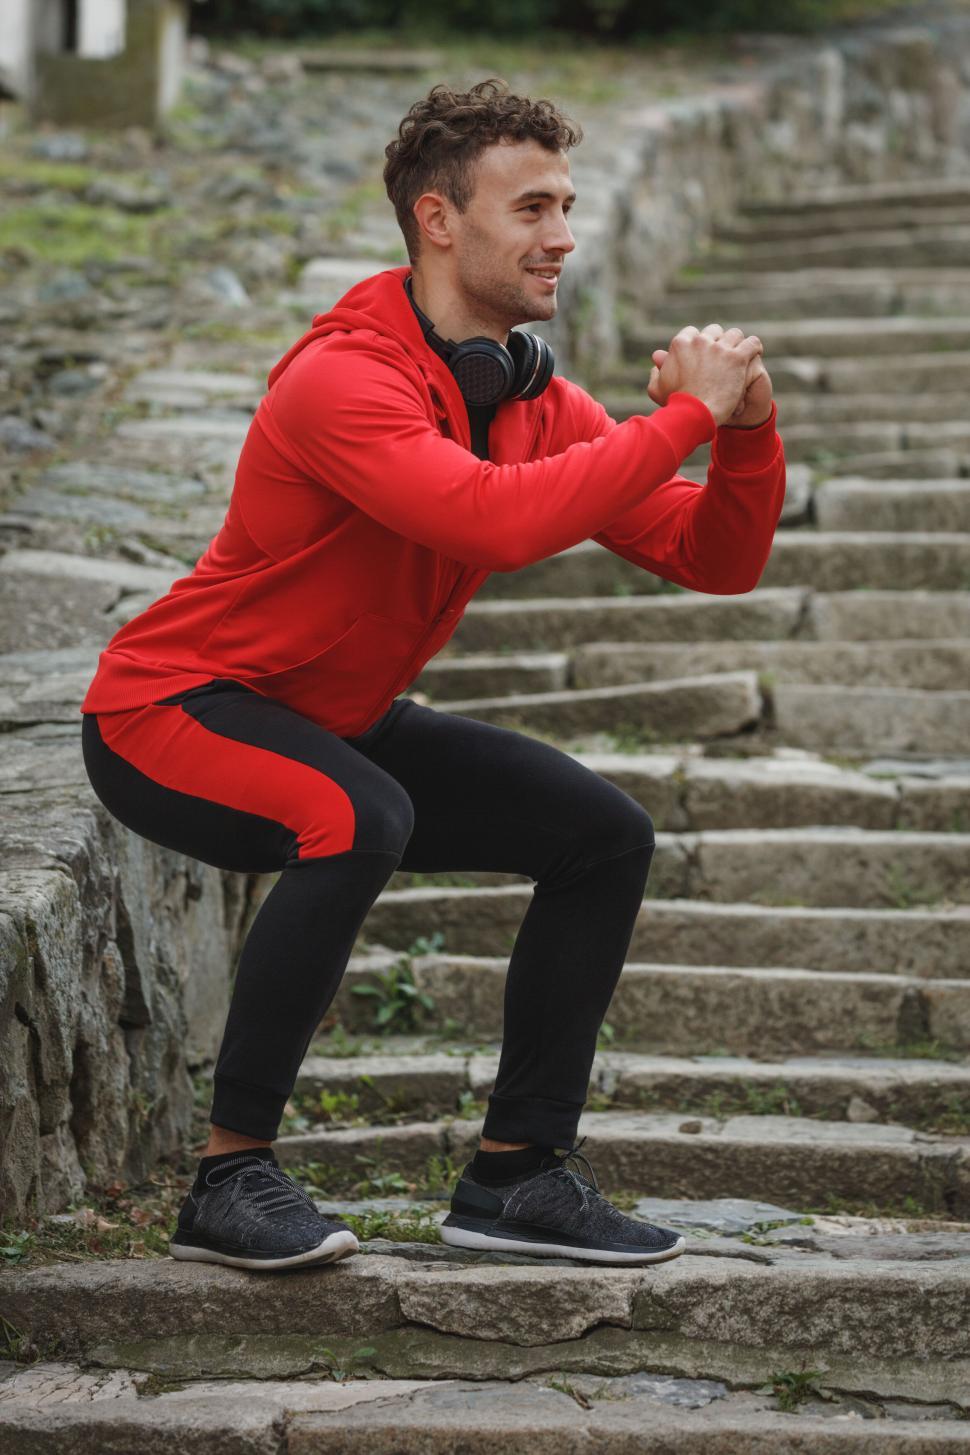 Free Image of Man doing squats outdoors on stone steps 